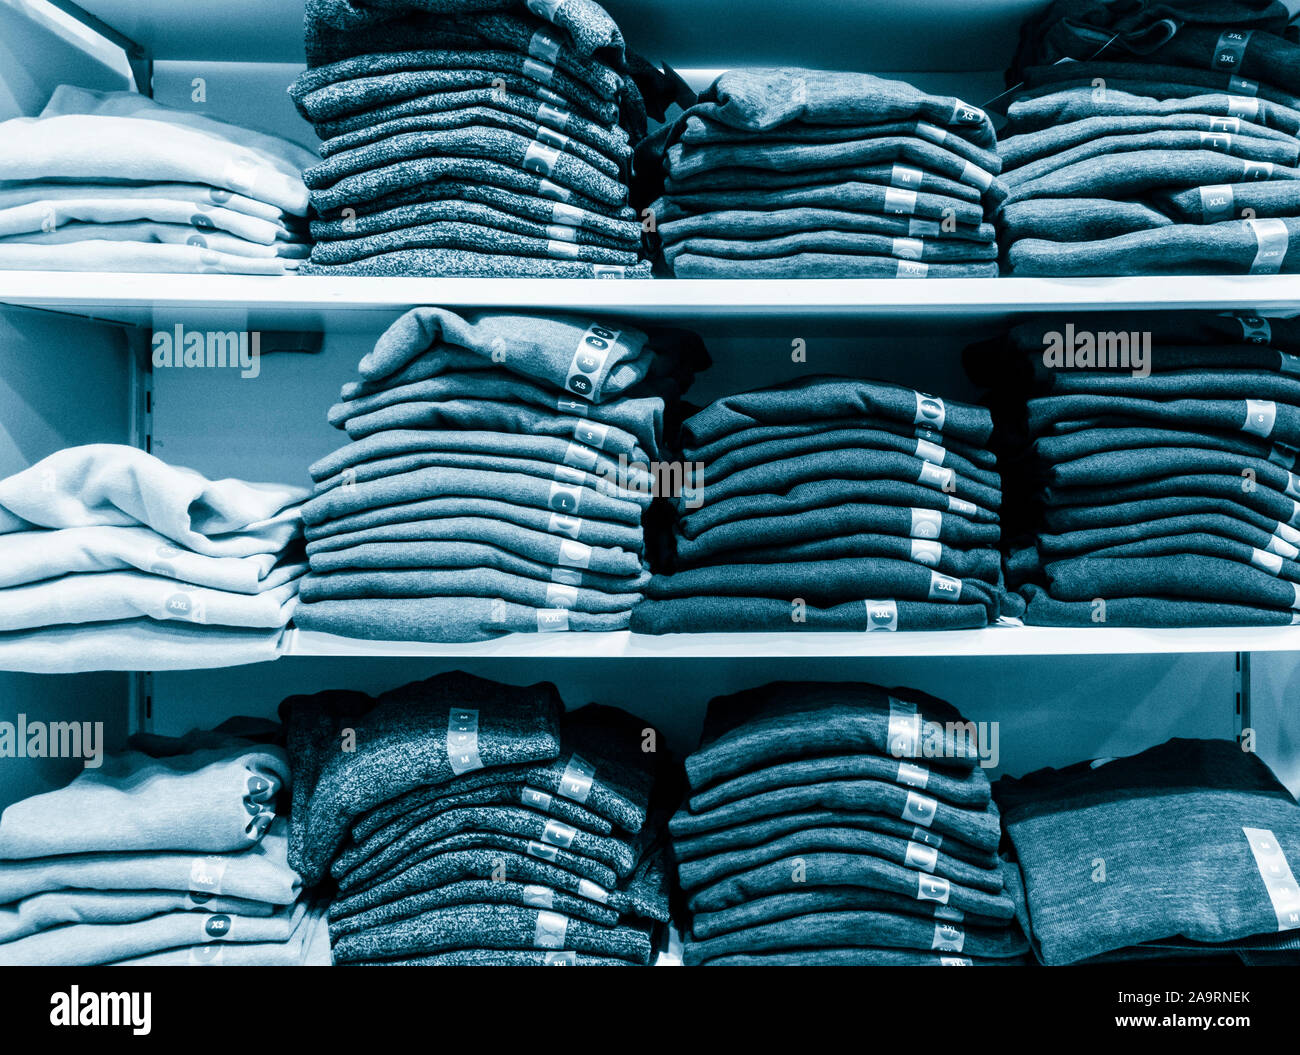 Folded jumpers, pullovers in clothing store. Stock Photo